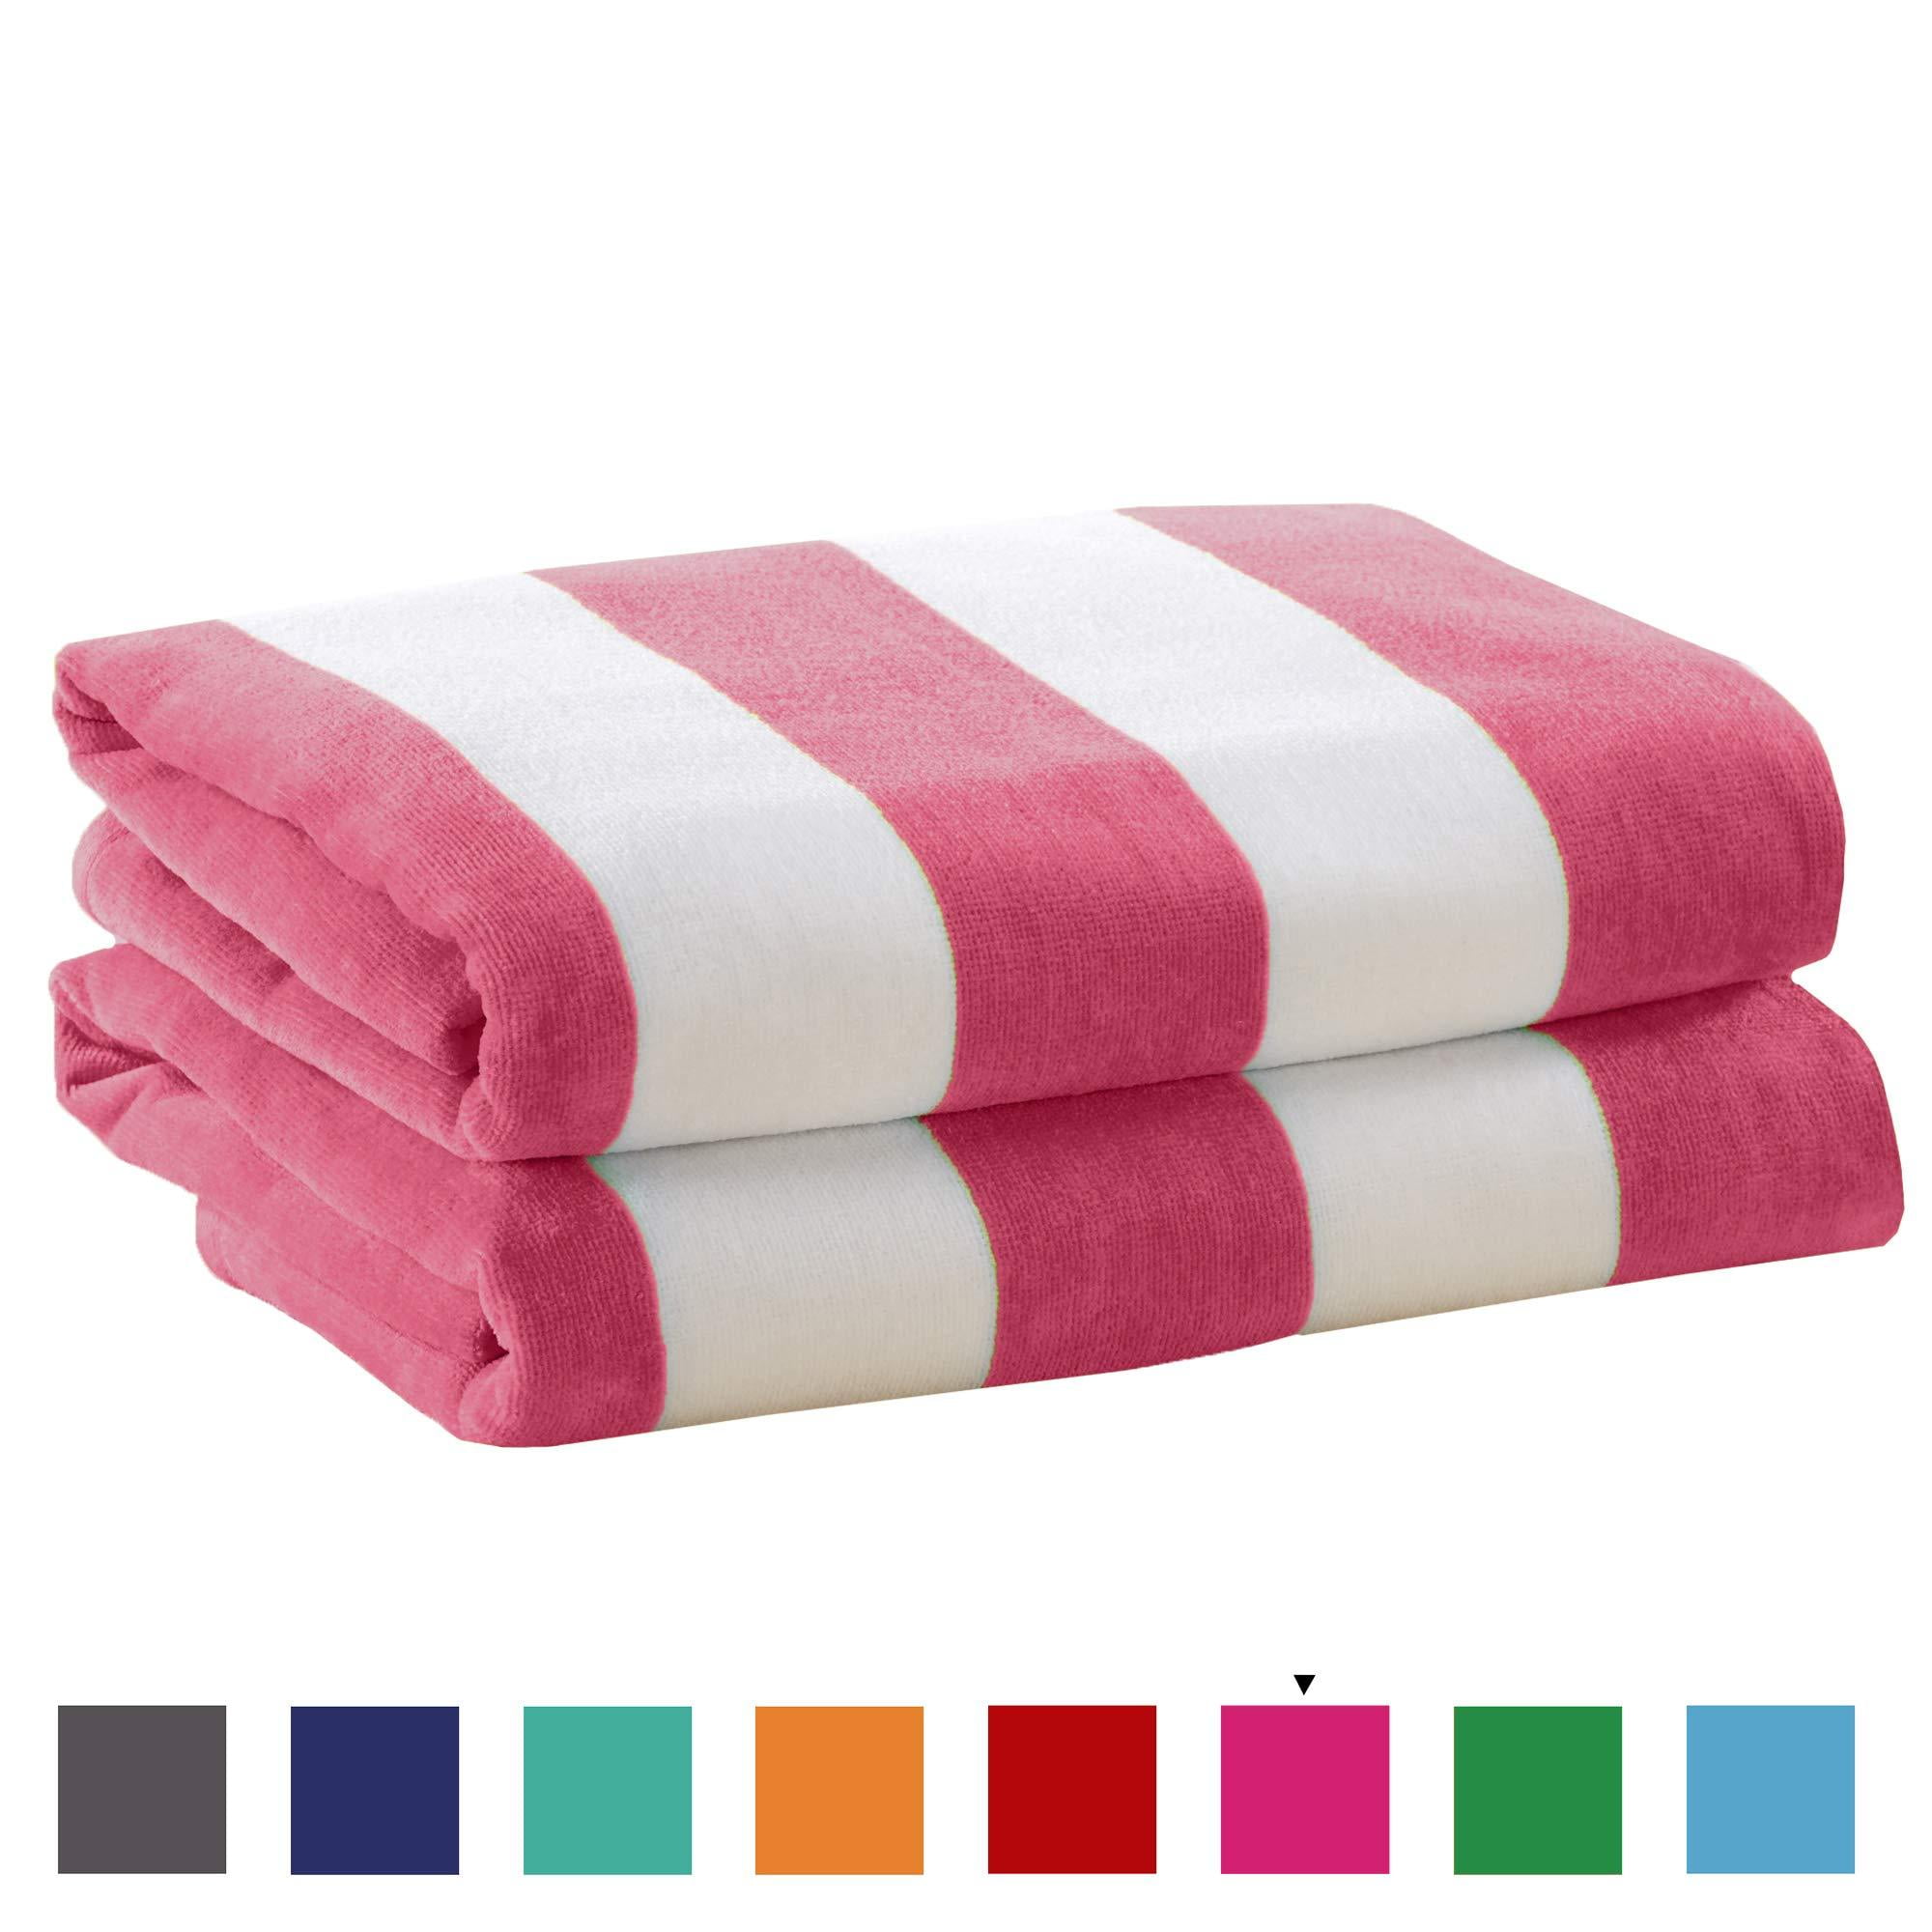 Details about   Great Bay Home Oversized Plush Velour 100% Cotton Beach Towel Cabana Stripe Poo 